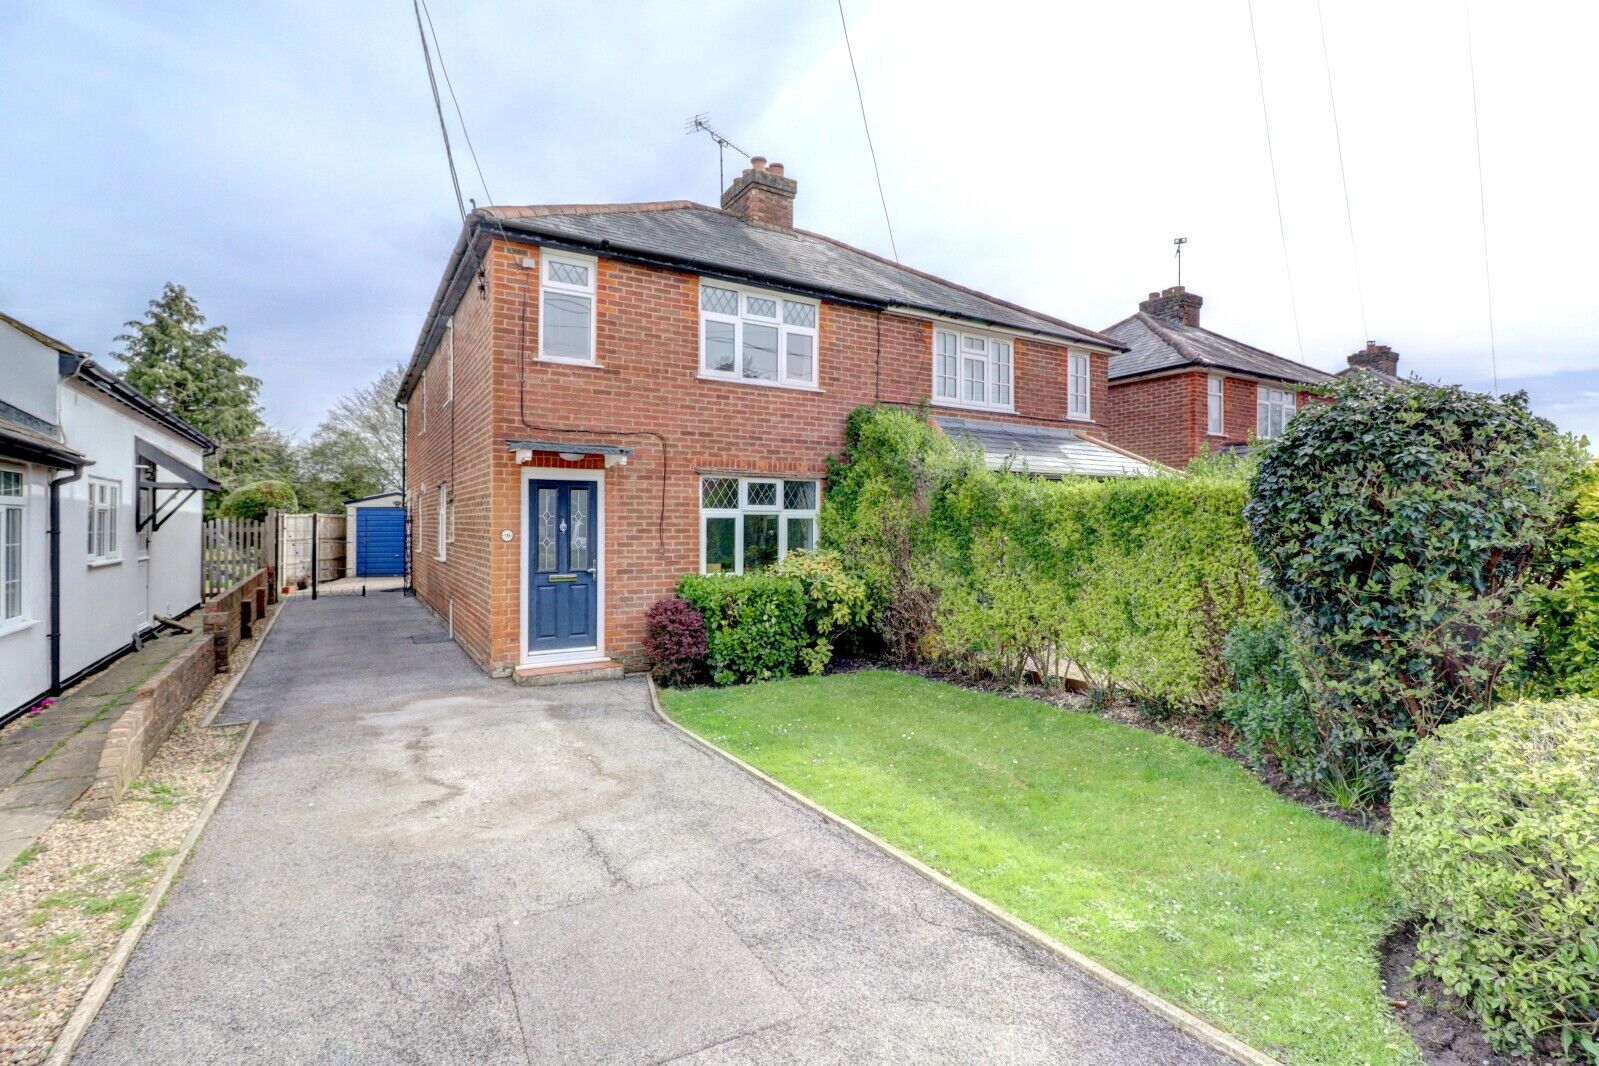 3 bedroom semi detached property for sale Orchard Way, Holmer Green, HP15, main image